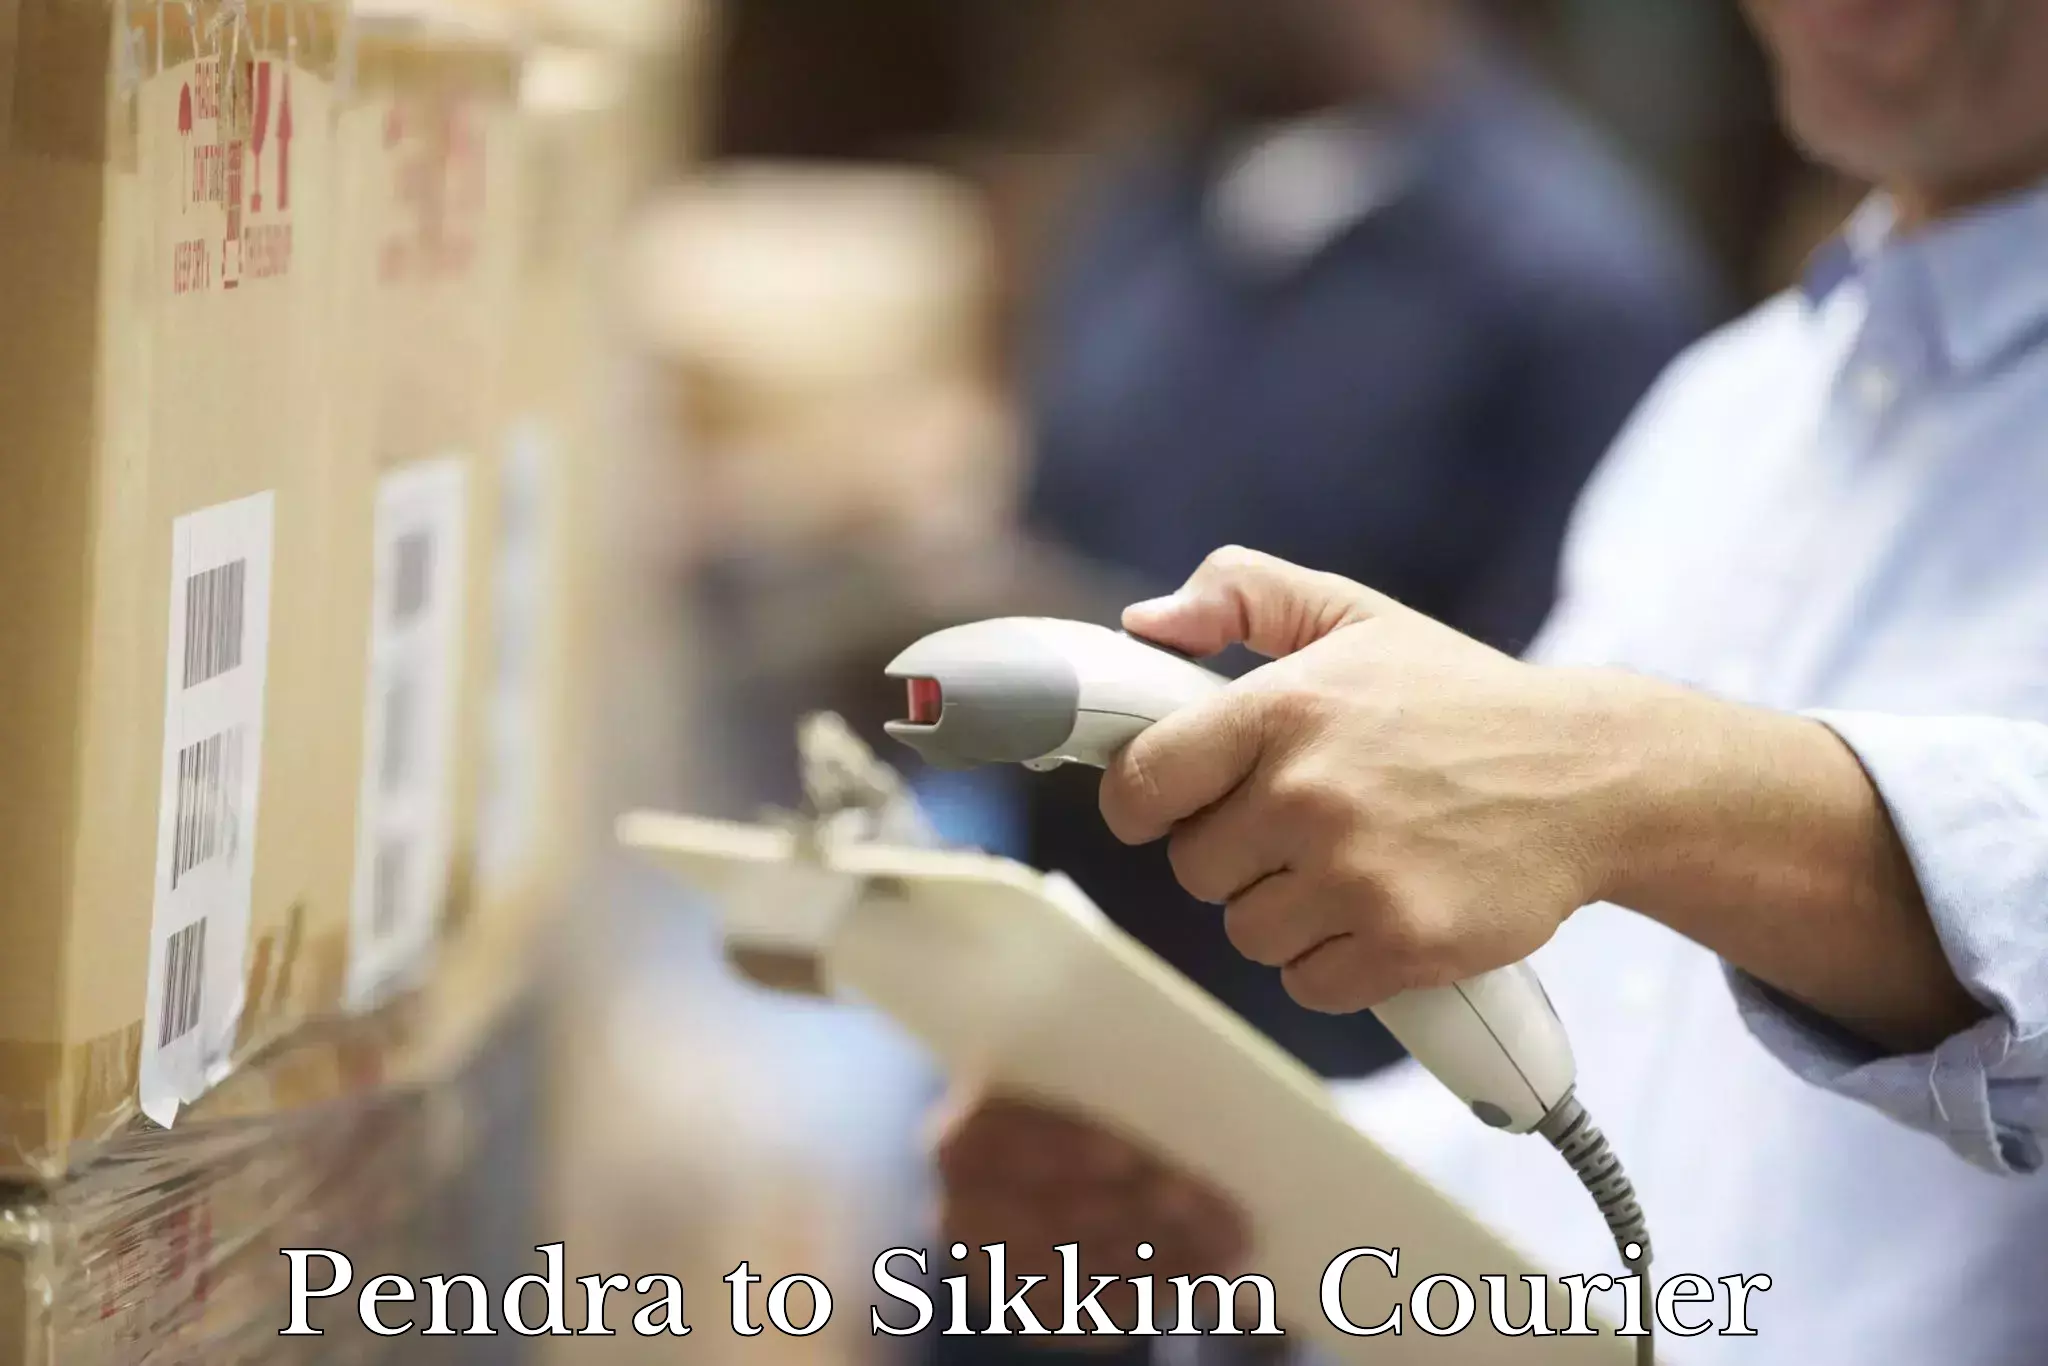 Tech-enabled shipping in Pendra to Sikkim